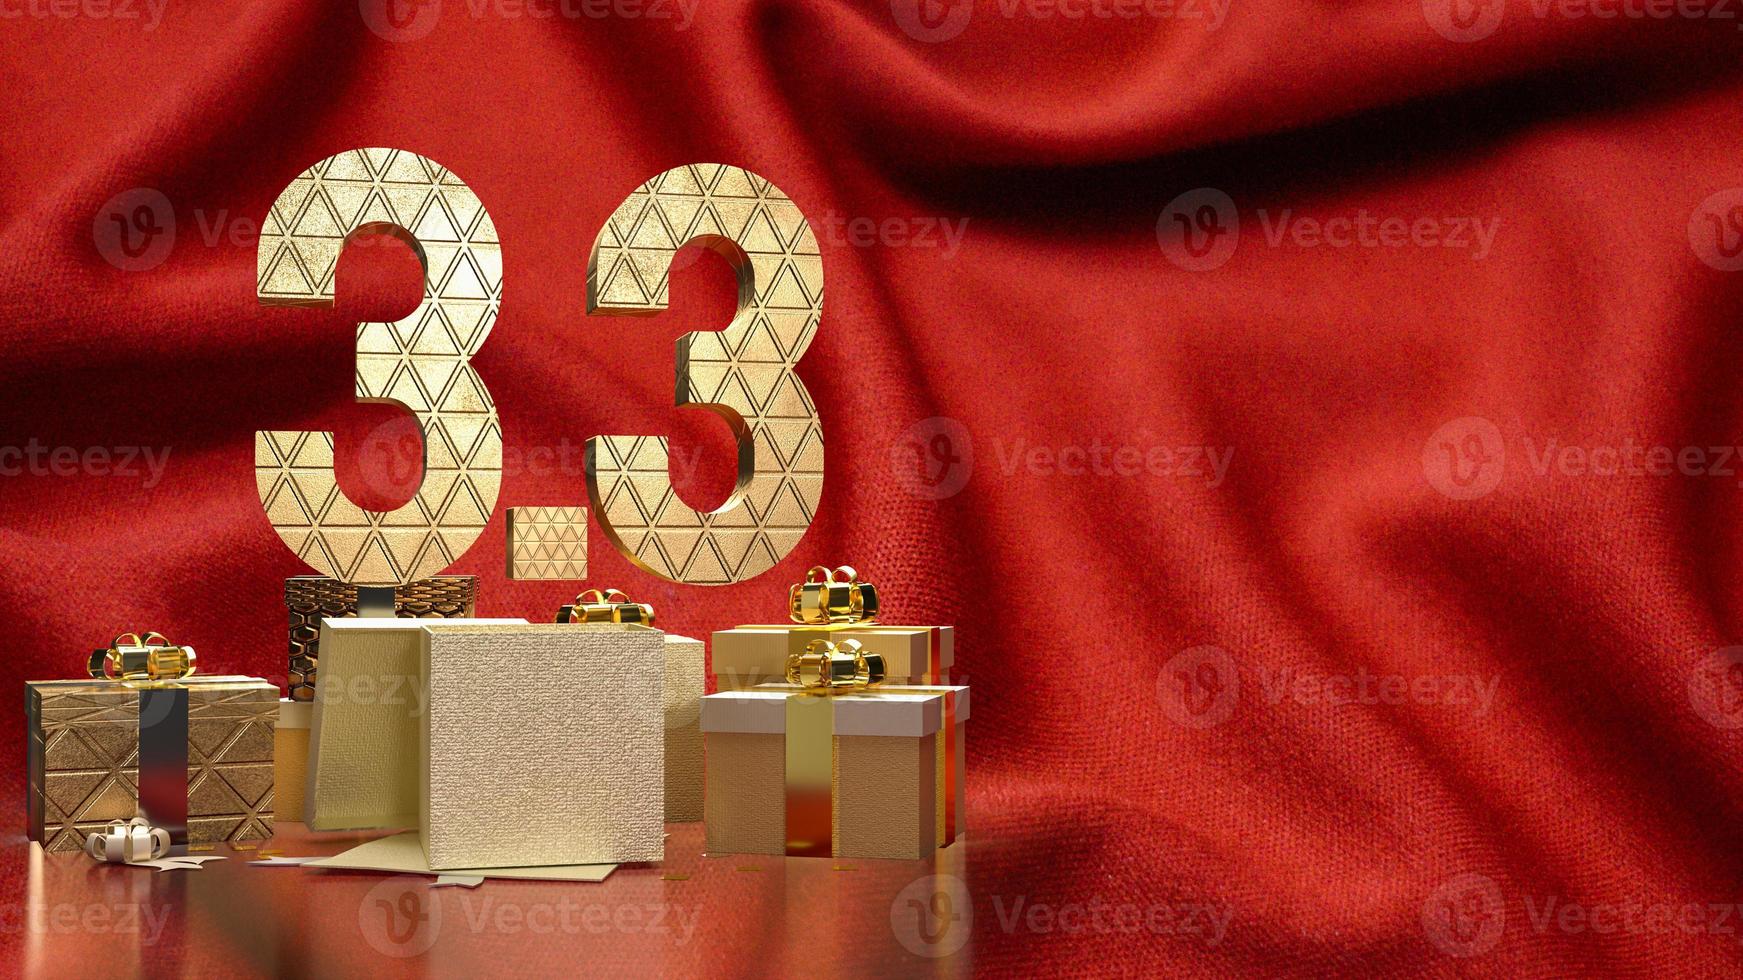 The 3.3 and gold gift box on red silk  for marketing  or sale  promotion 3d rendering photo